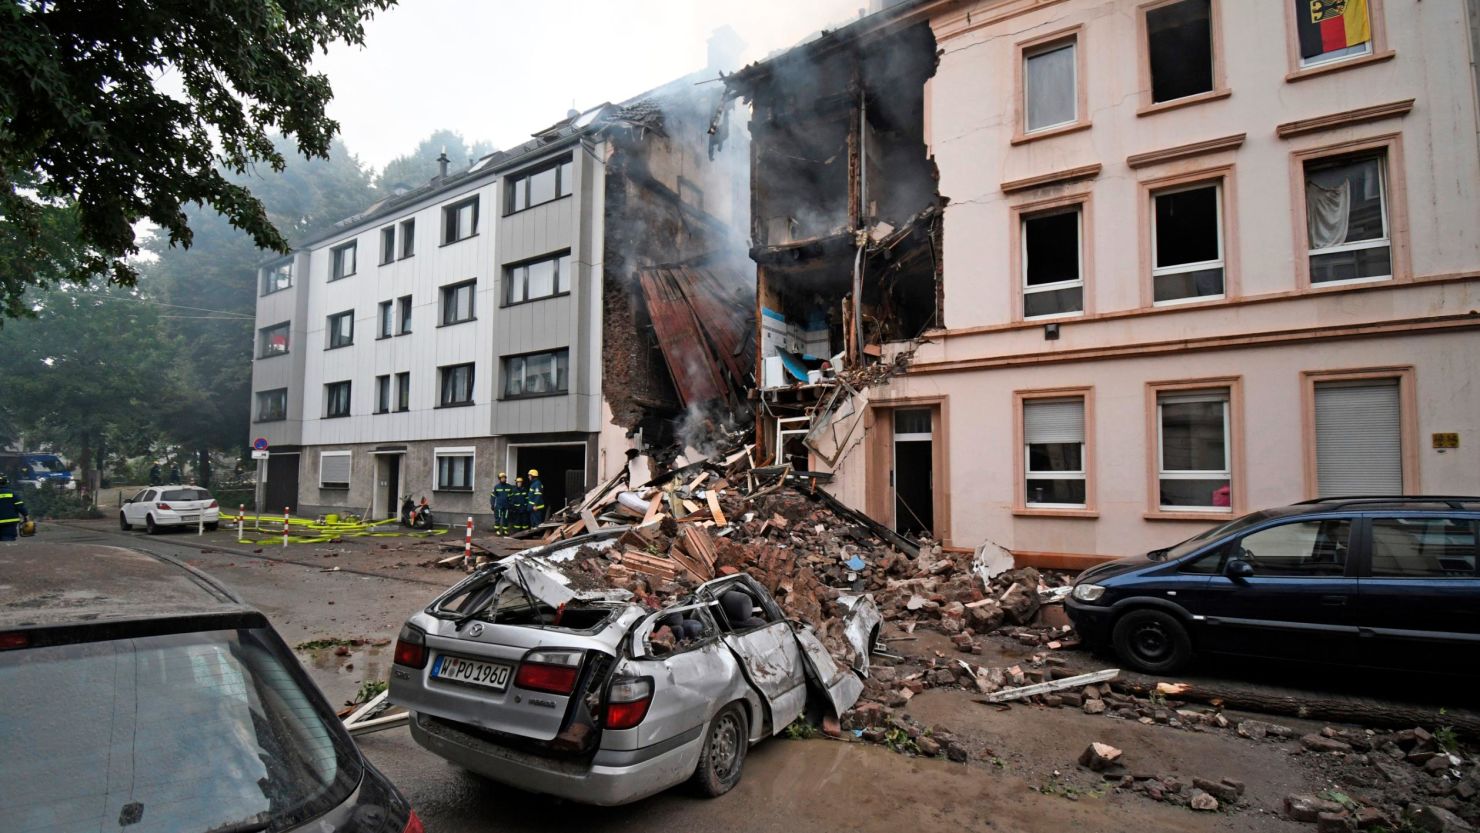 A car and a house were destroyed after an explosion Saturday in Wuppertal, Germany. 